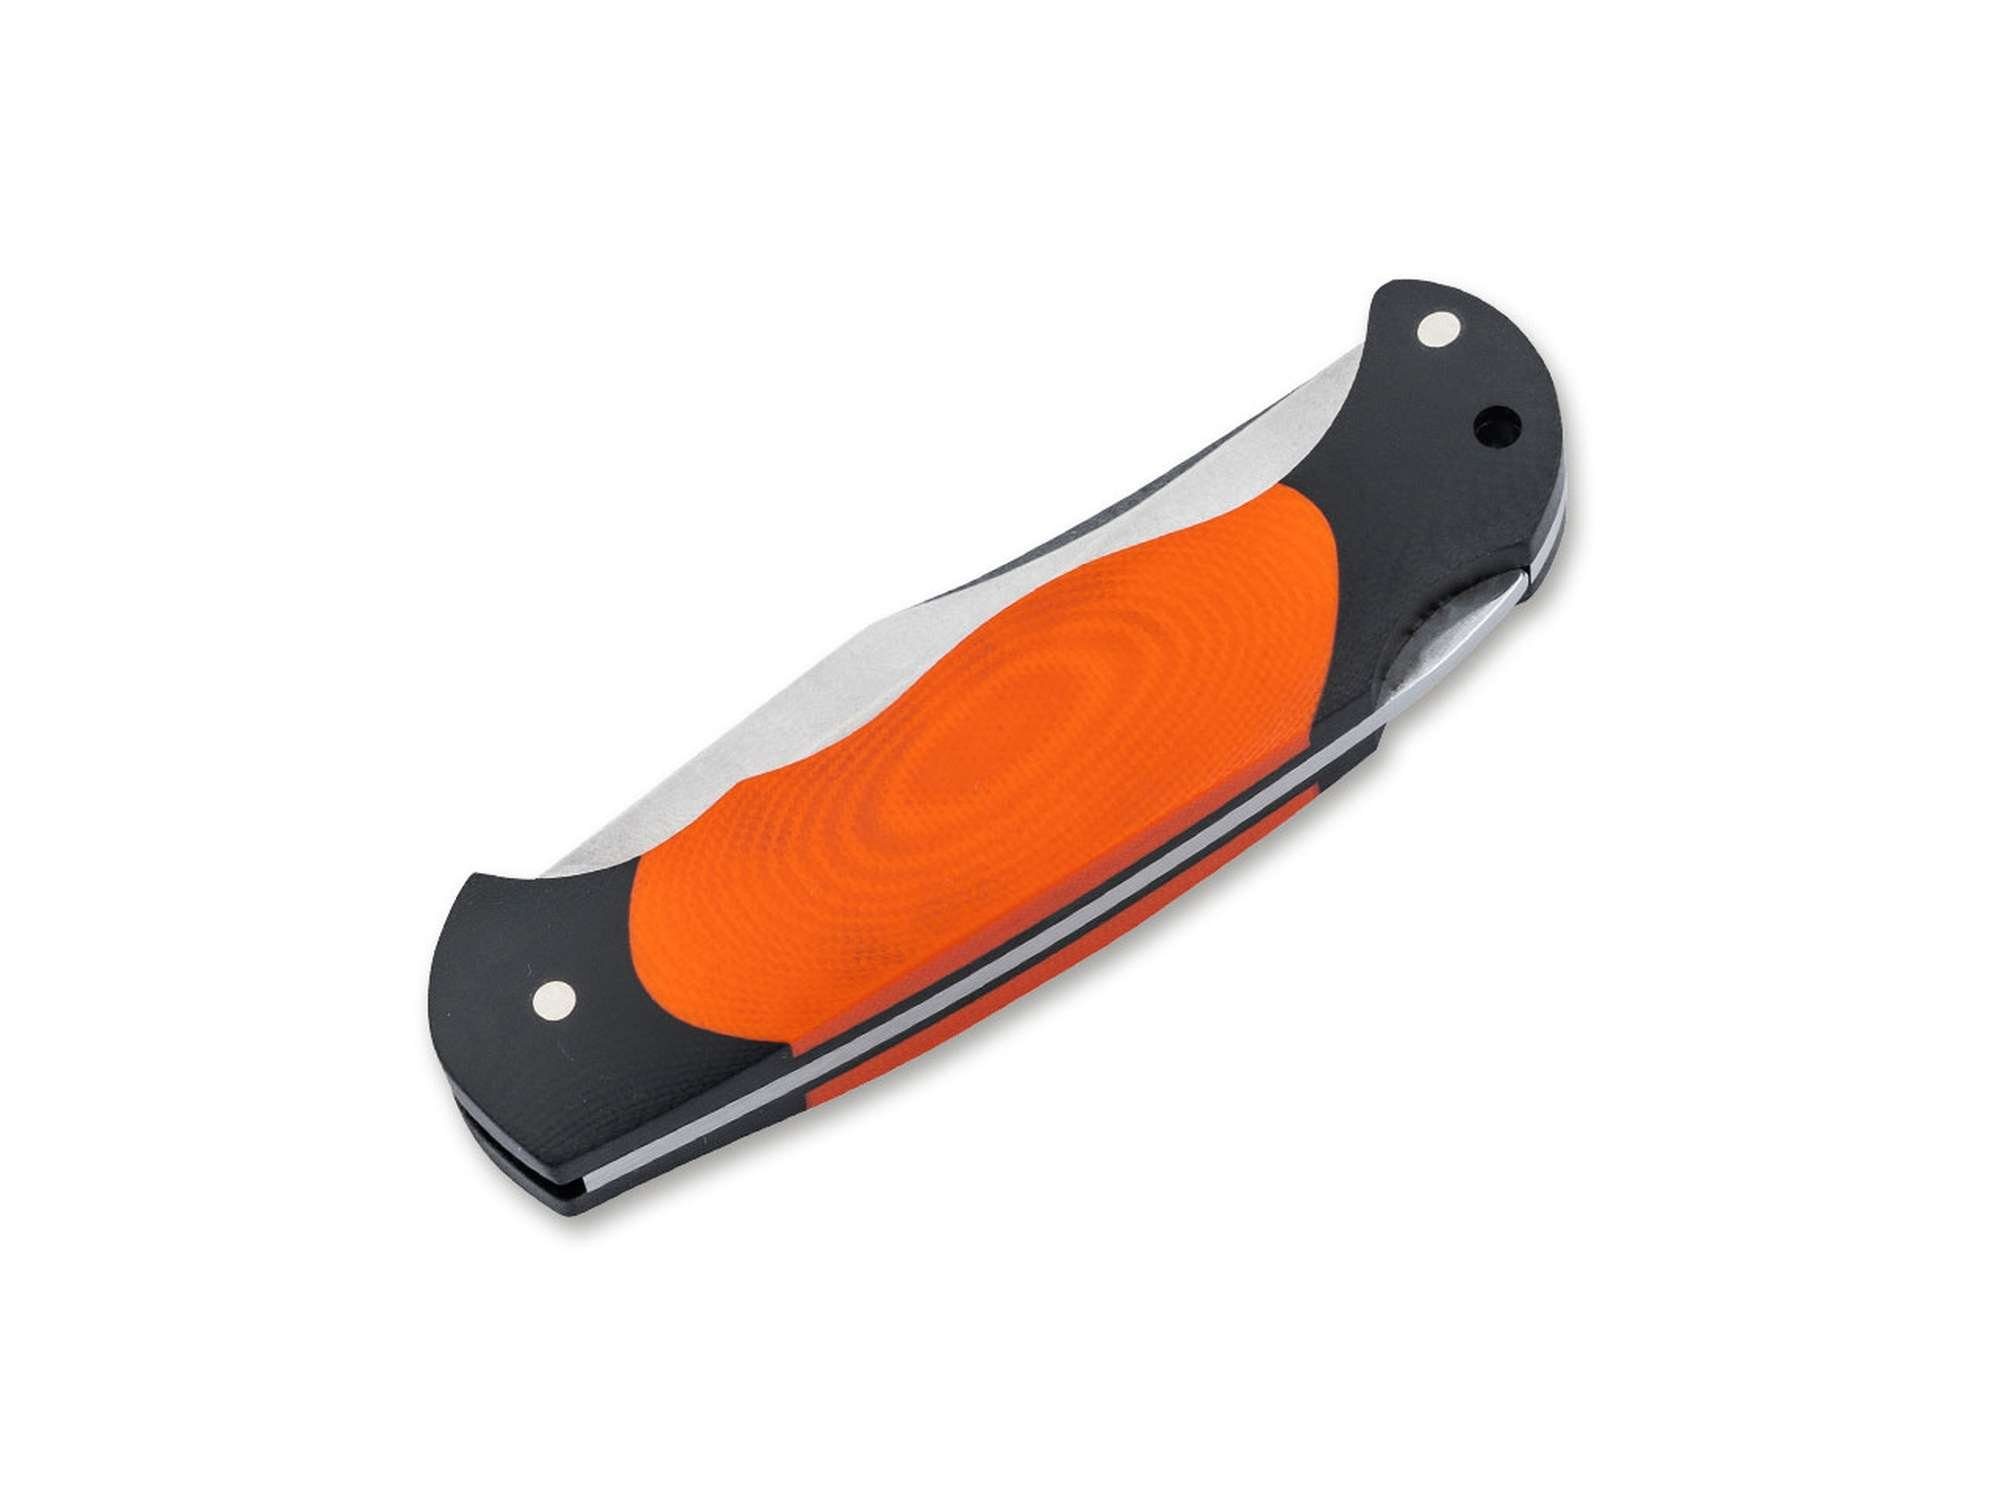 Orange Böker Black Böker Black Orange, Böker Taschenmesser Scout G10 G10 Scout